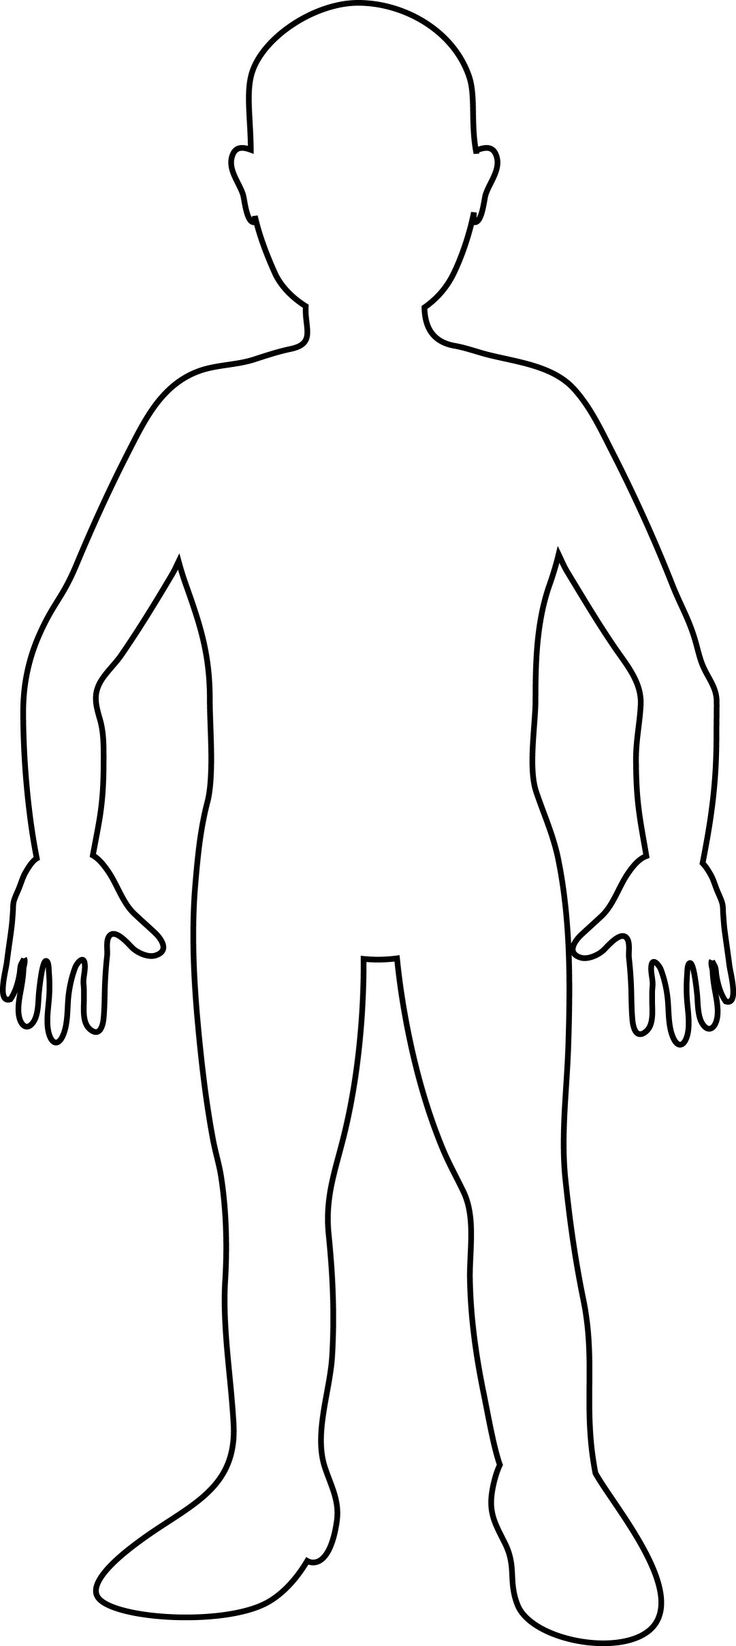 Body Map Template - ClipArt Best Within Blank Body Map Template